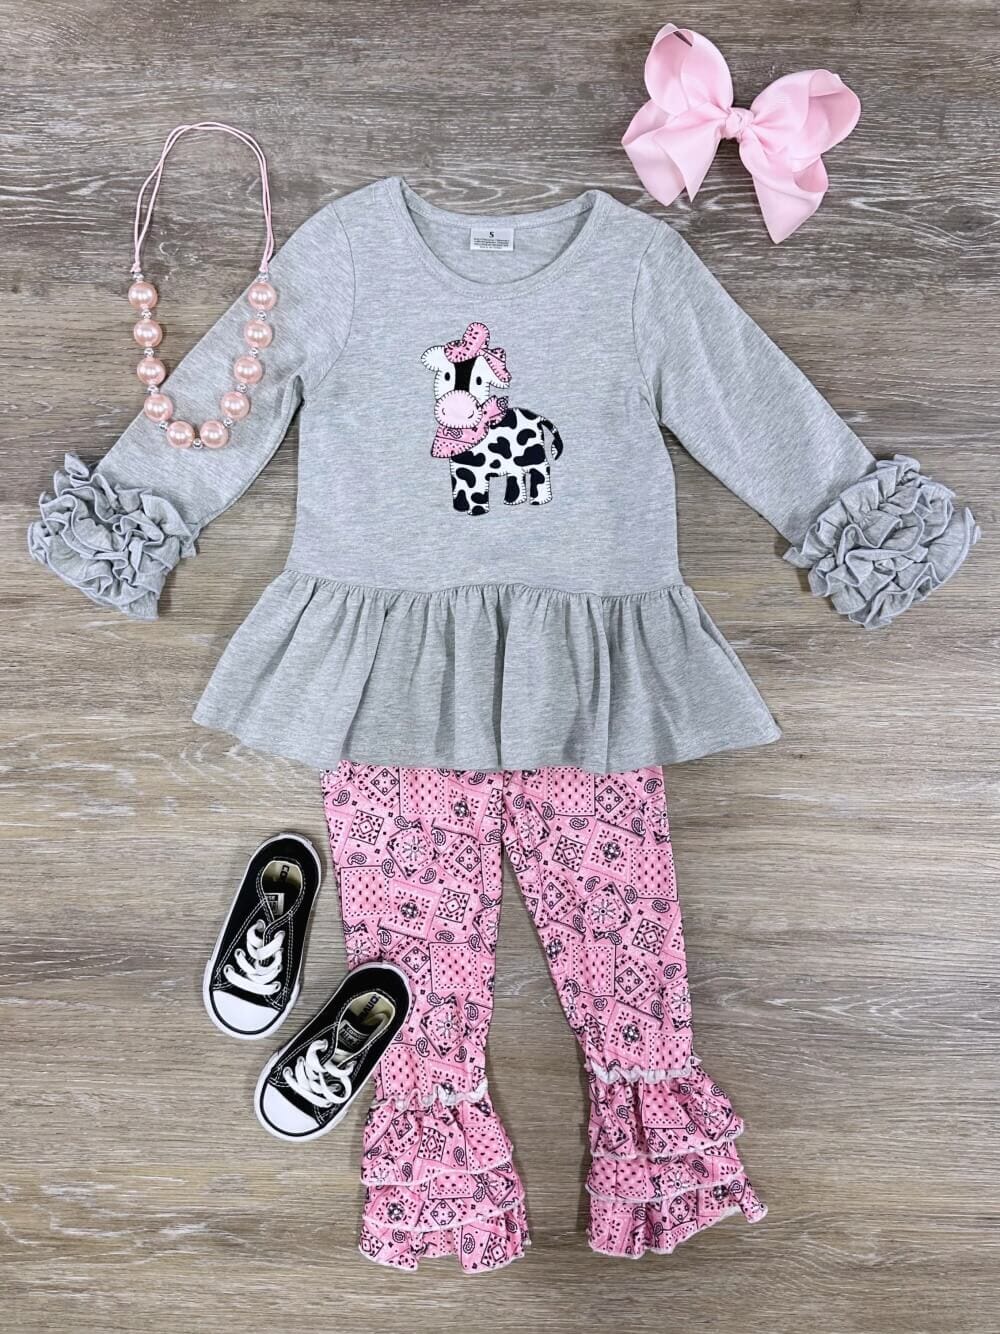 Country Cow Pink Bandana Girls Ruffle Leggings Outfit - Sydney So Sweet